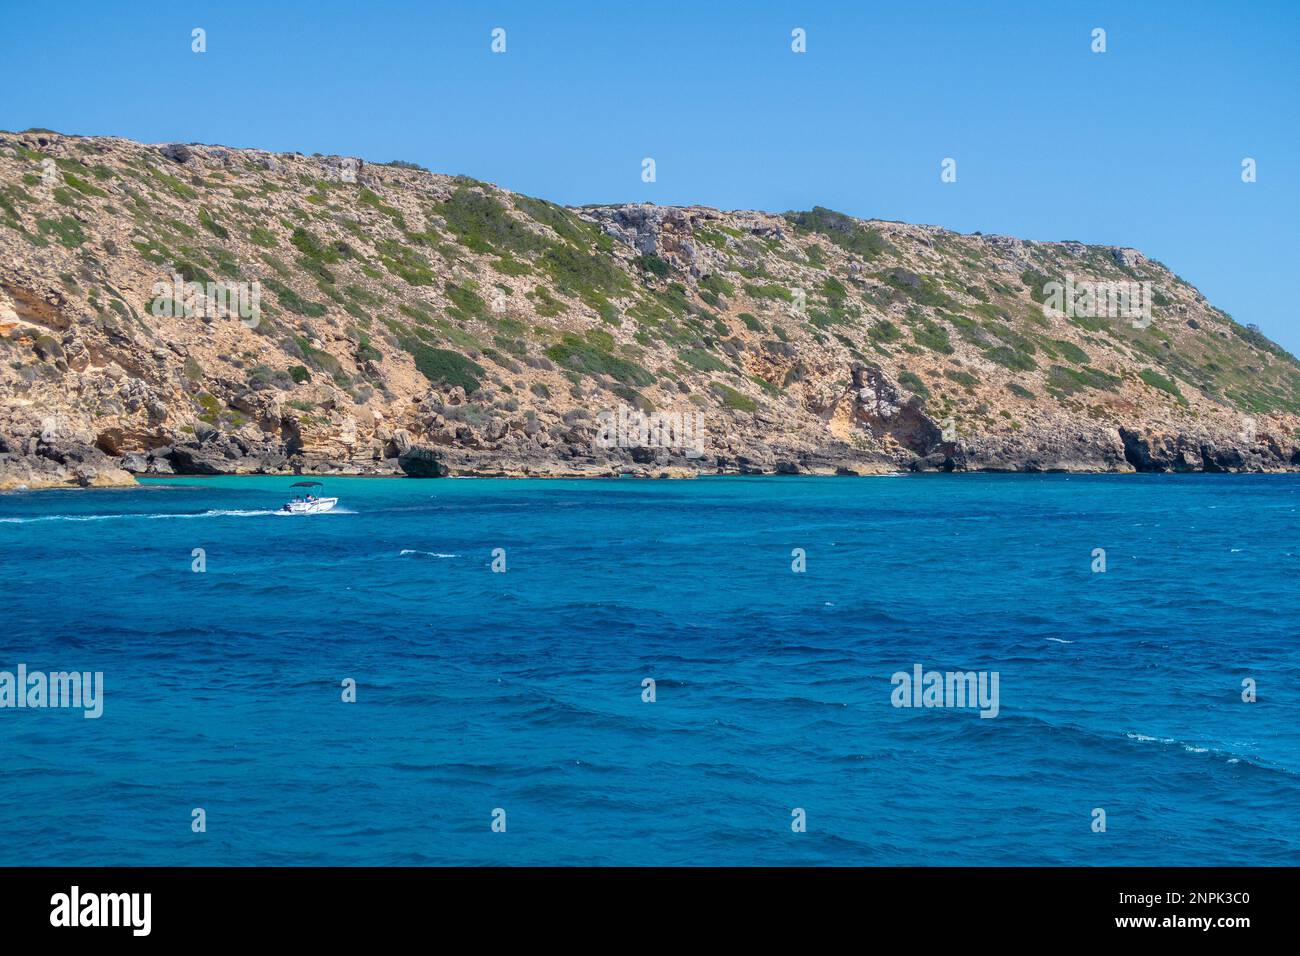 The coast of Majorca, showing the sea, hills and a speedboat Stock Photo